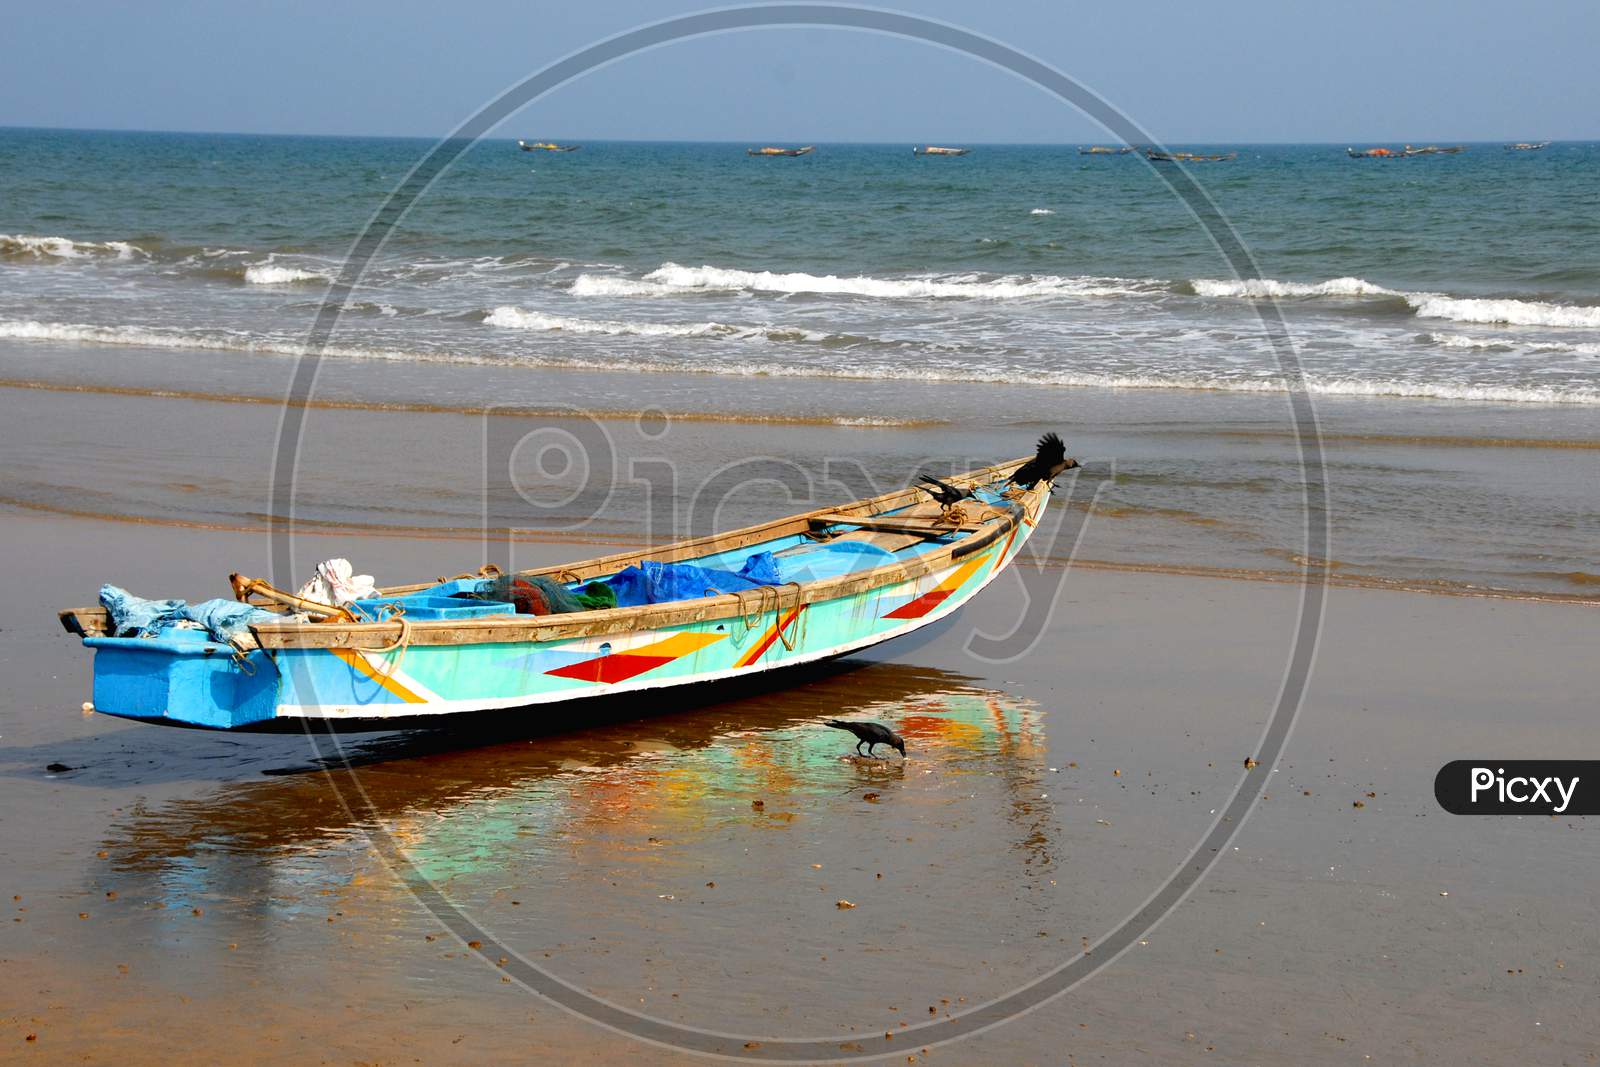 Fishing Boats At Beach With Sea in Background